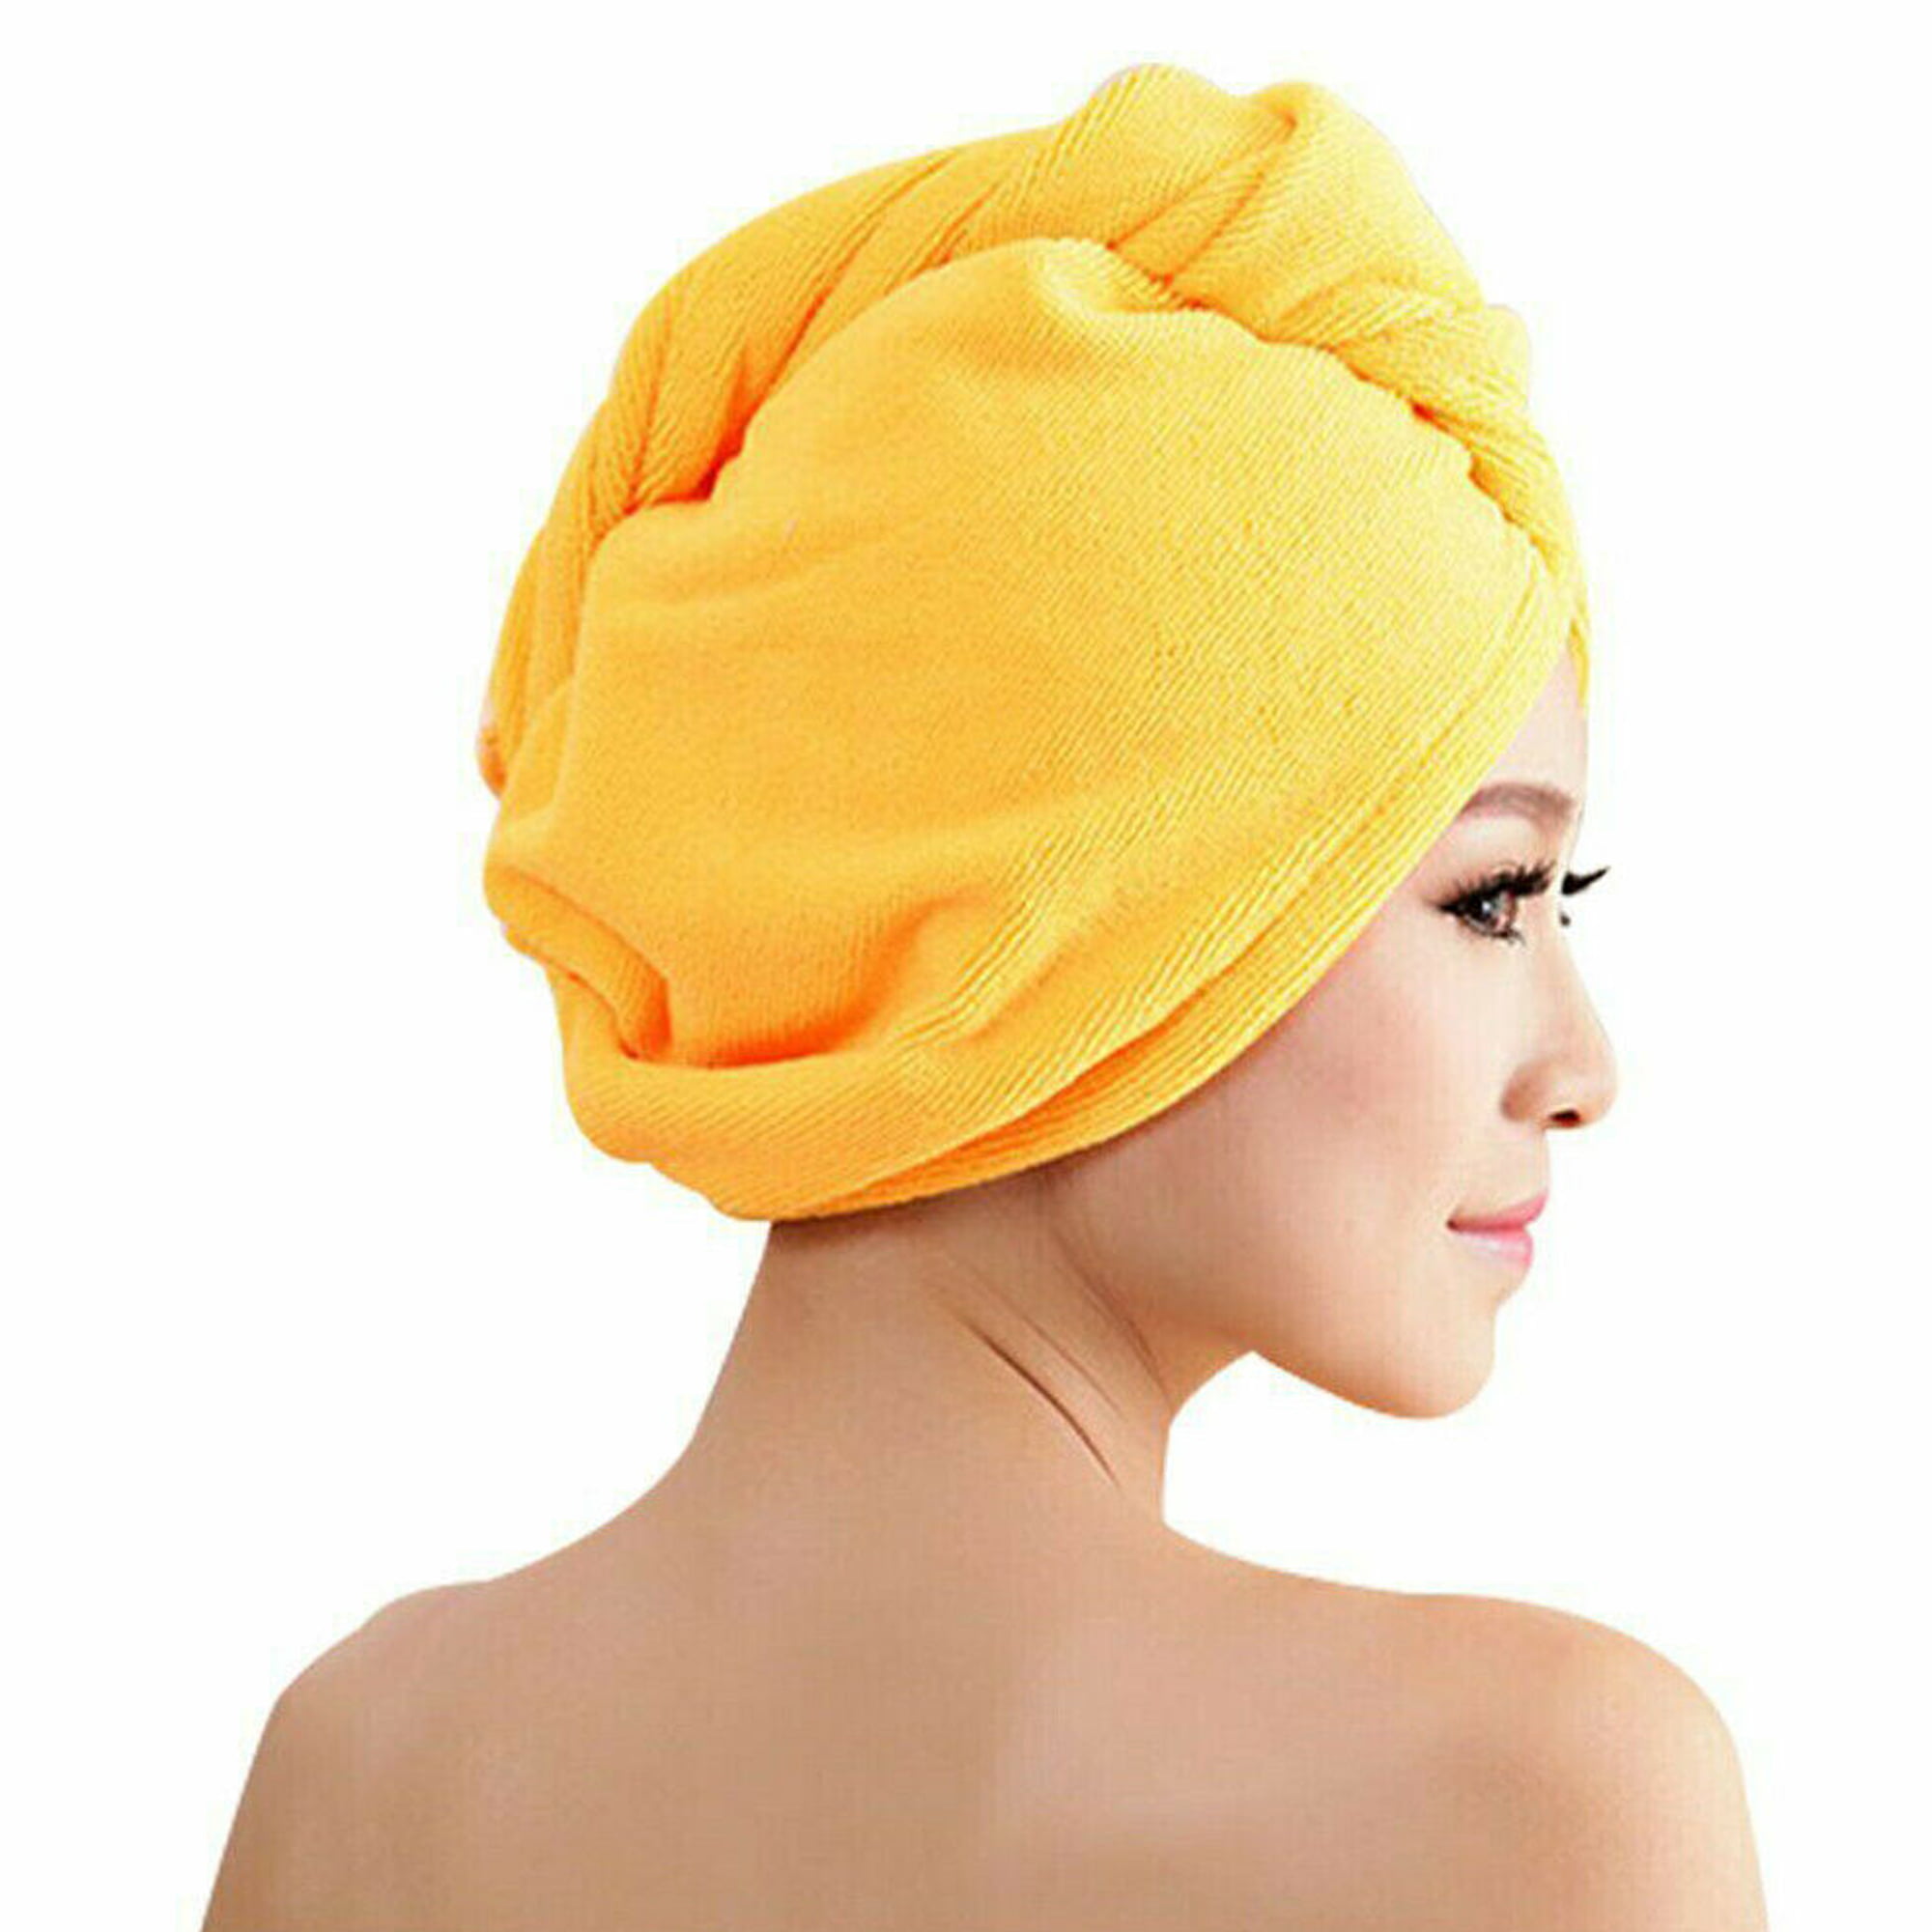 RAPID DRYING HAIR TOWEL CAP--Thick Absorbent Shower Cap 7 Colors 